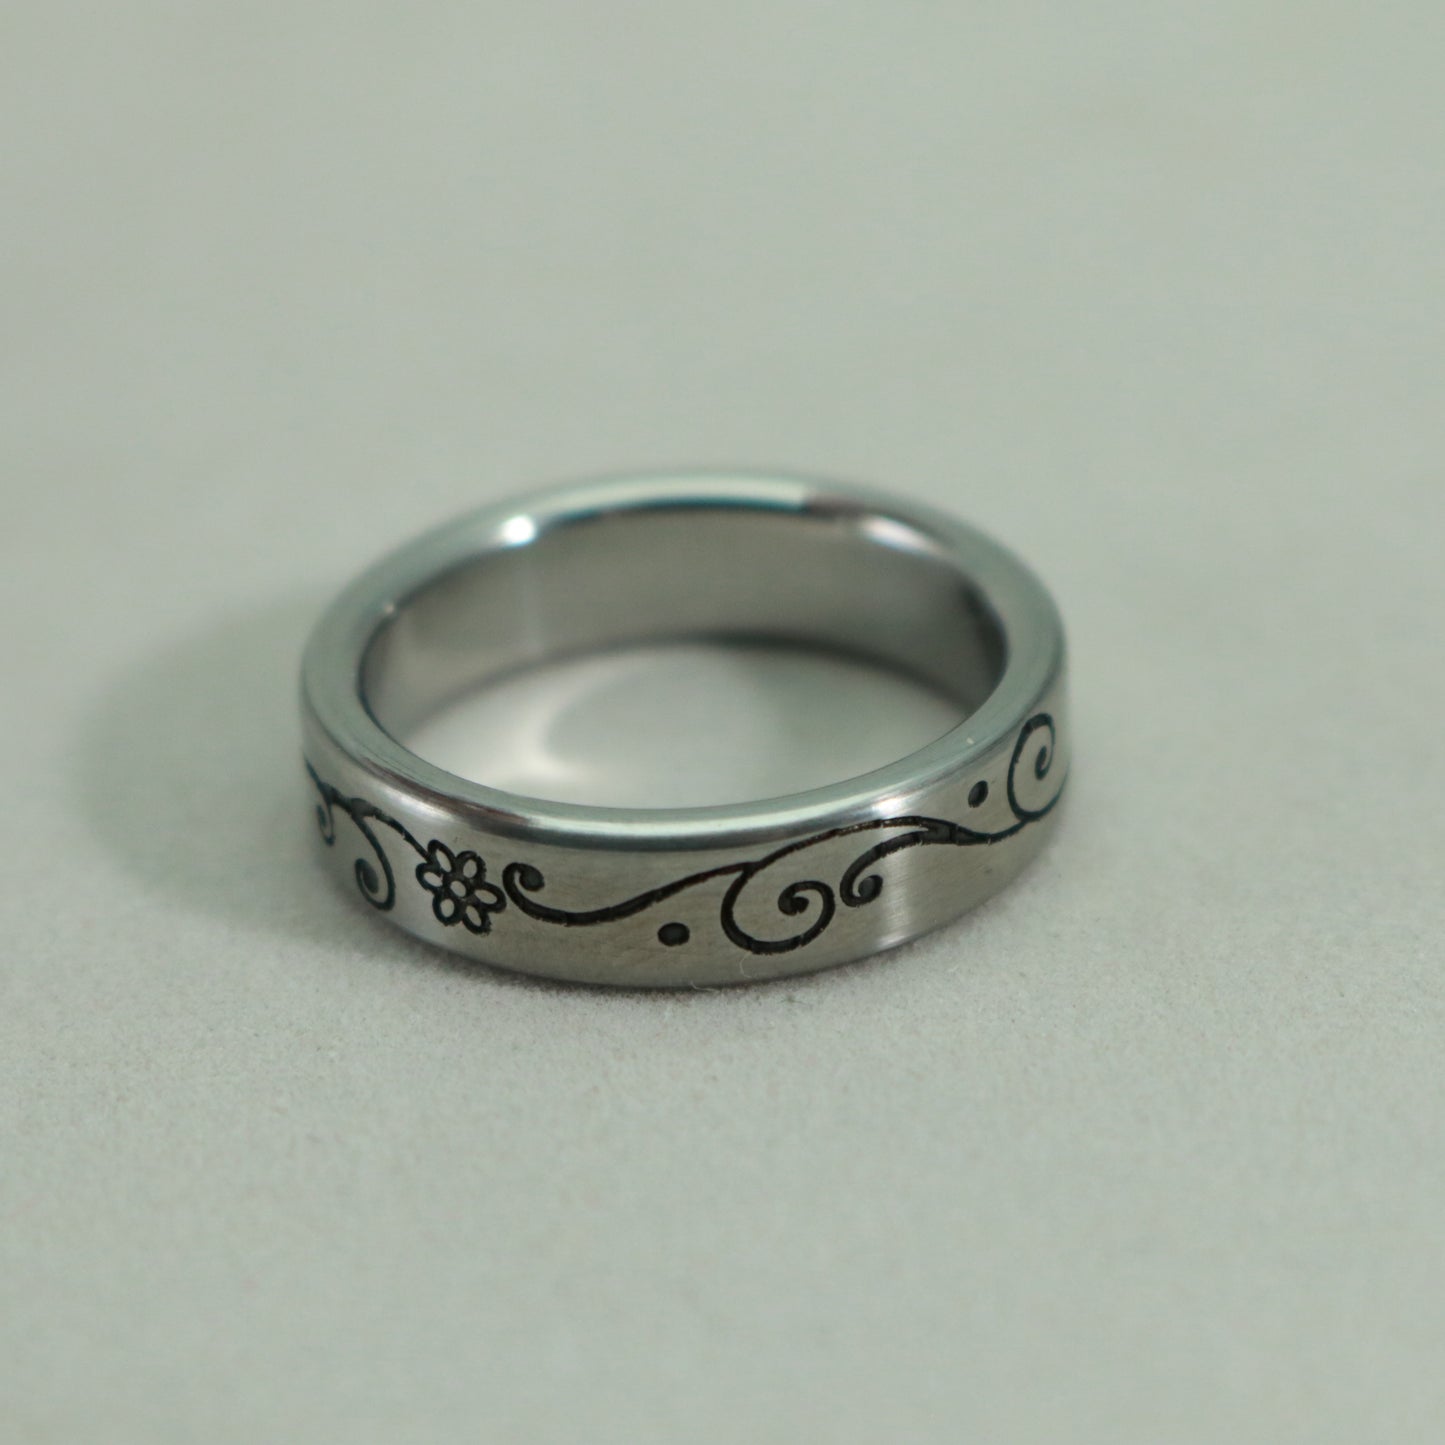 Ladies stainless steel ring in size 7 1/4 engraved with a beautiful floral pattern